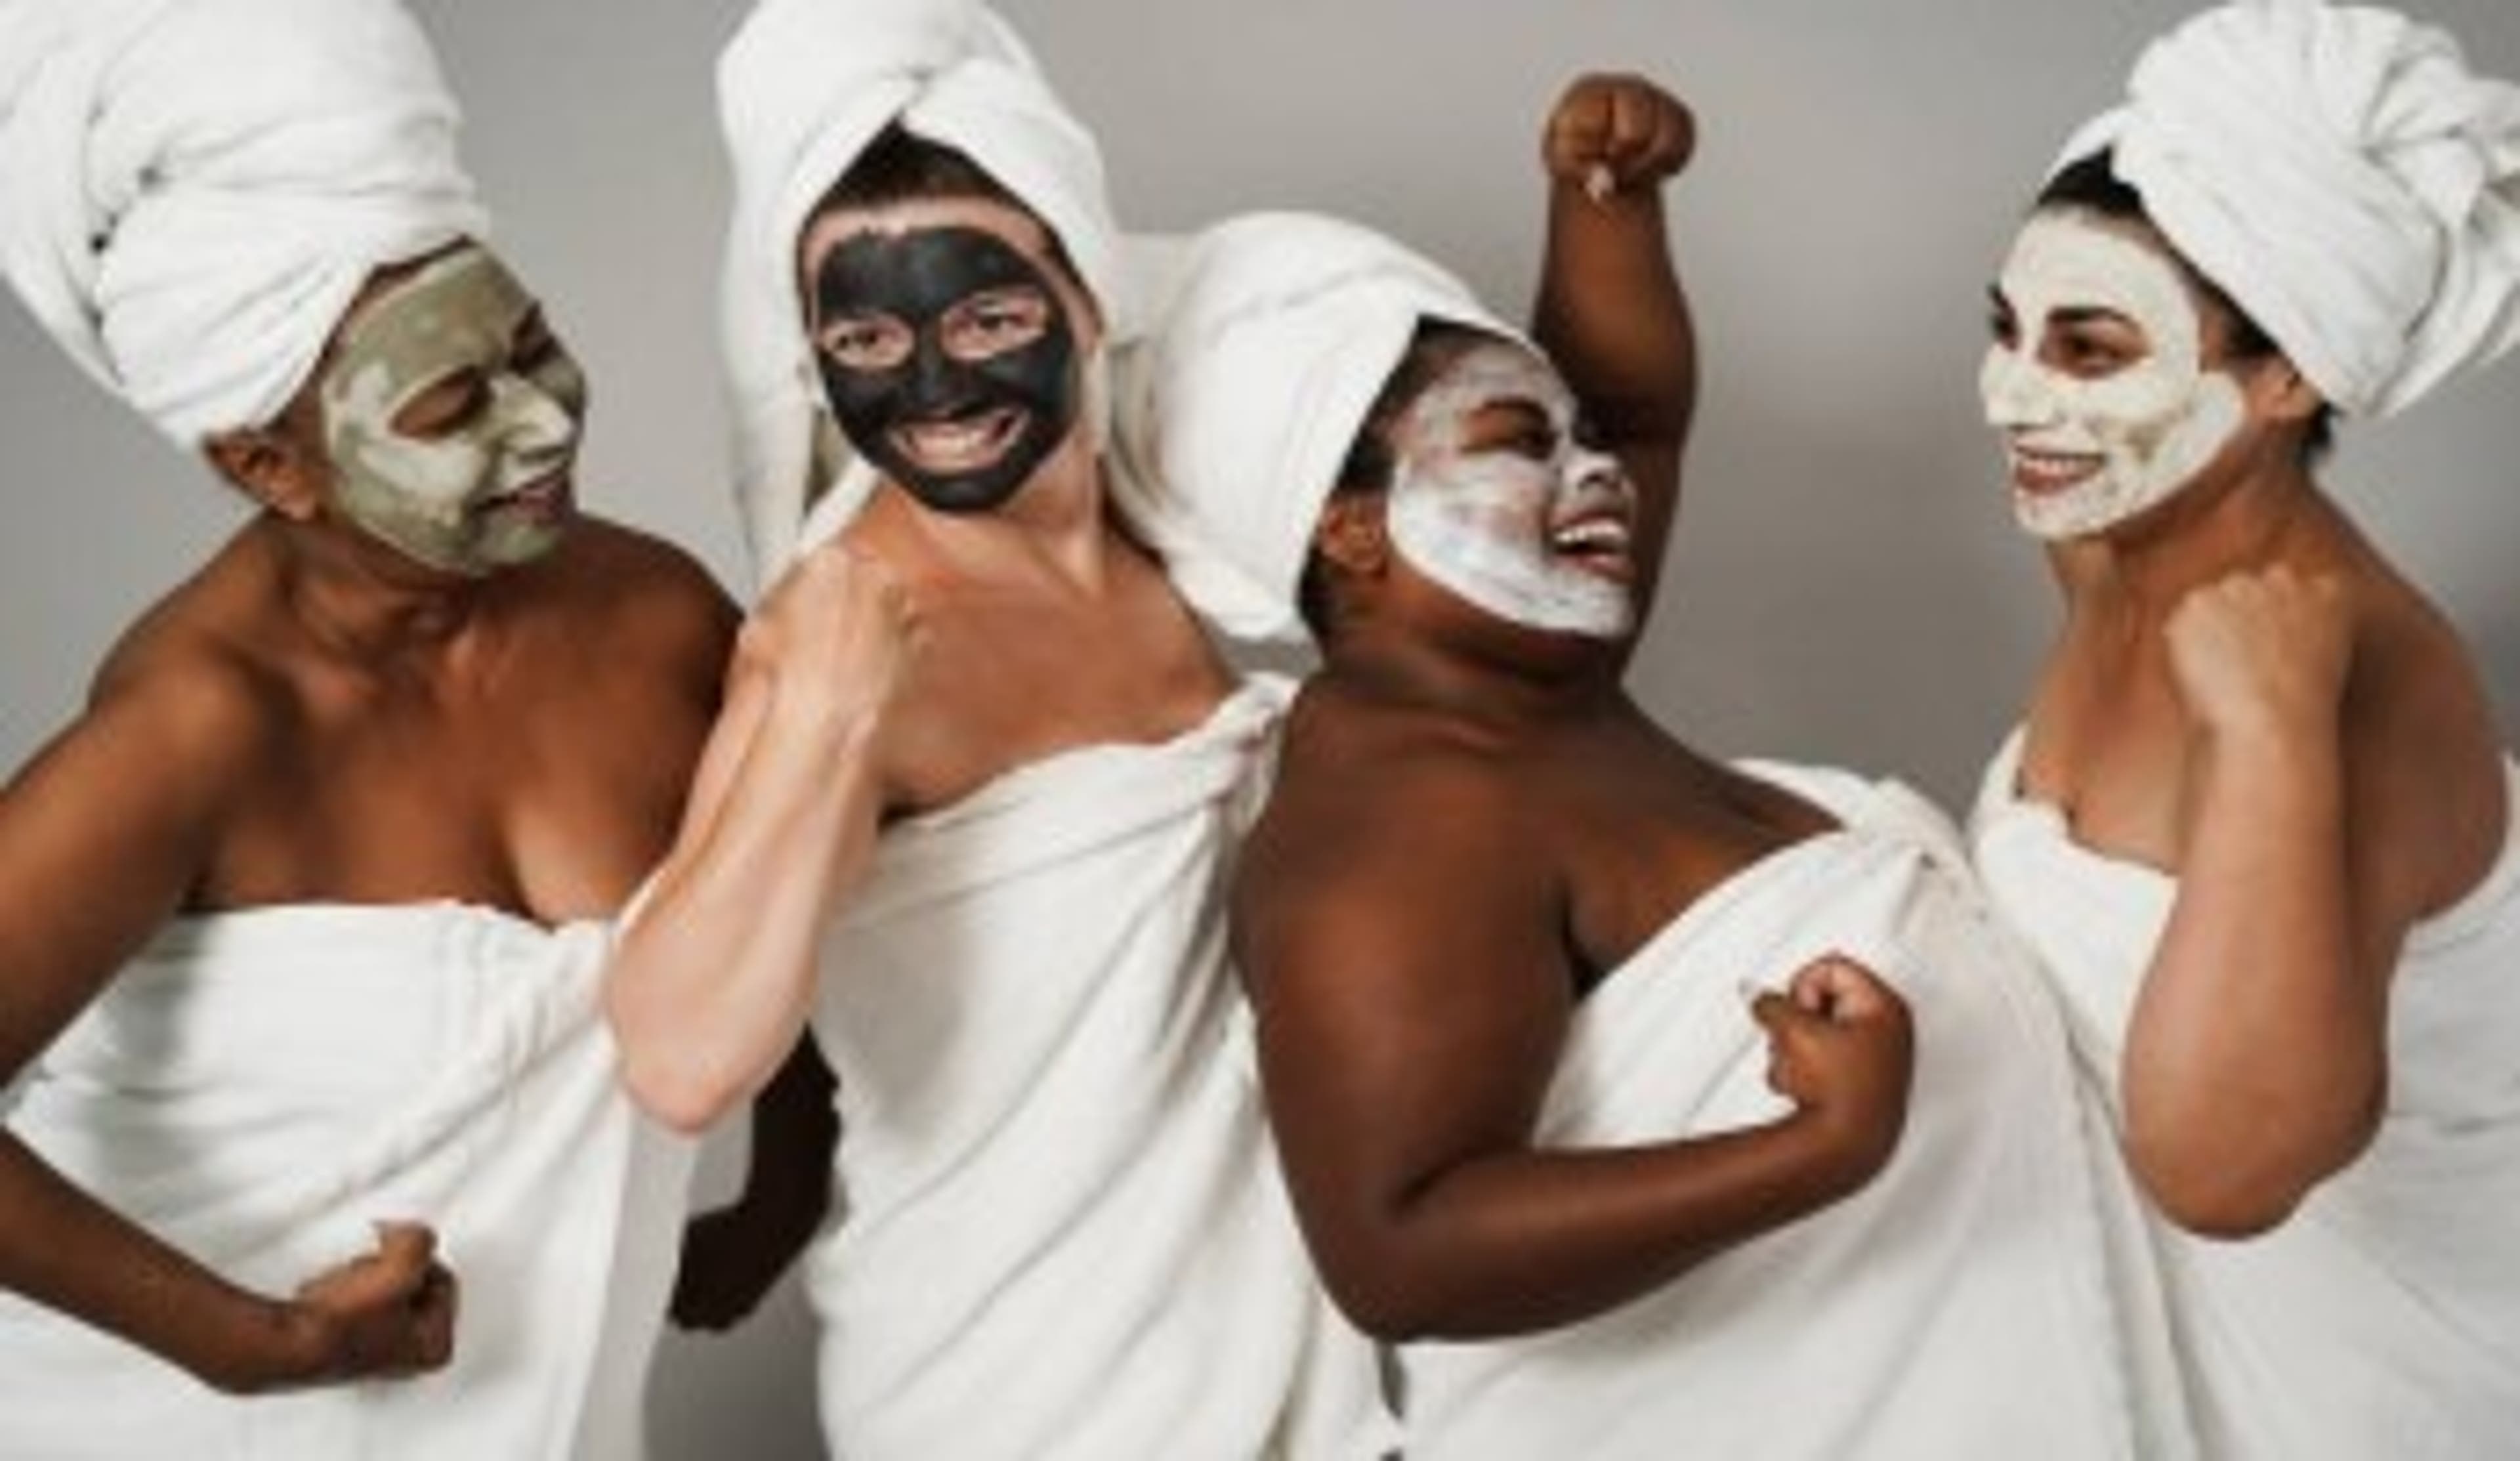  Four women in towels with mud facials 